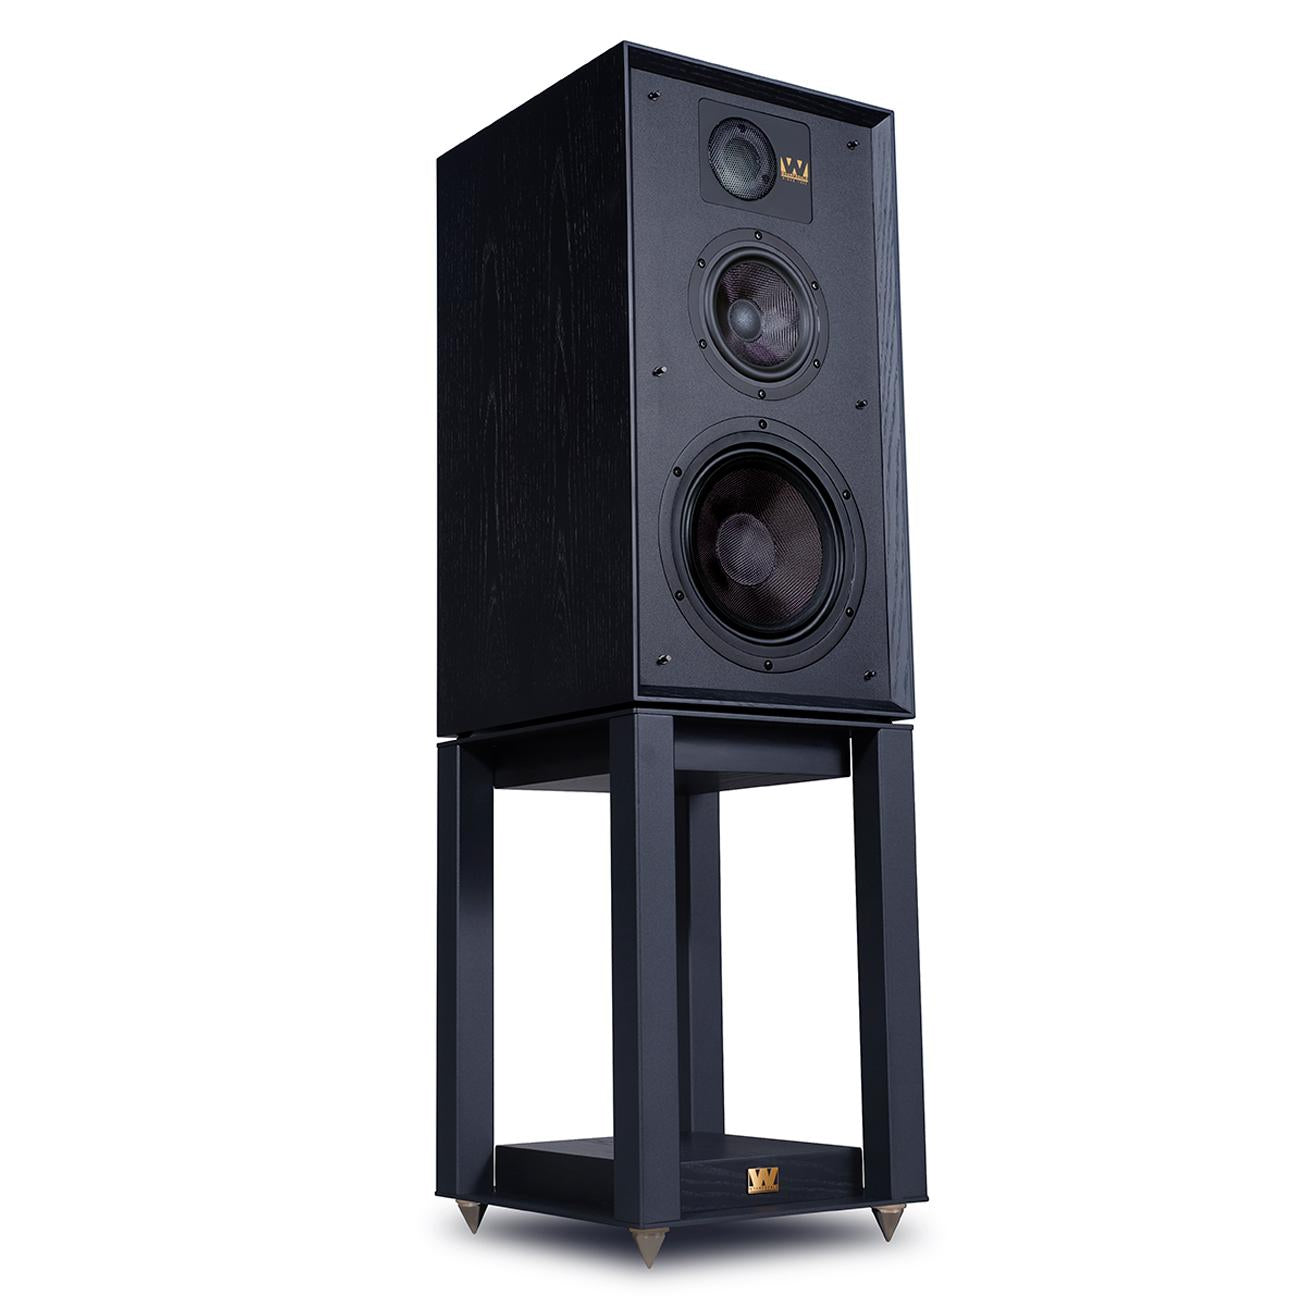 Wharfedale Heritage Series Linton Stand Mount Speakers Black Oak at Audio Influence